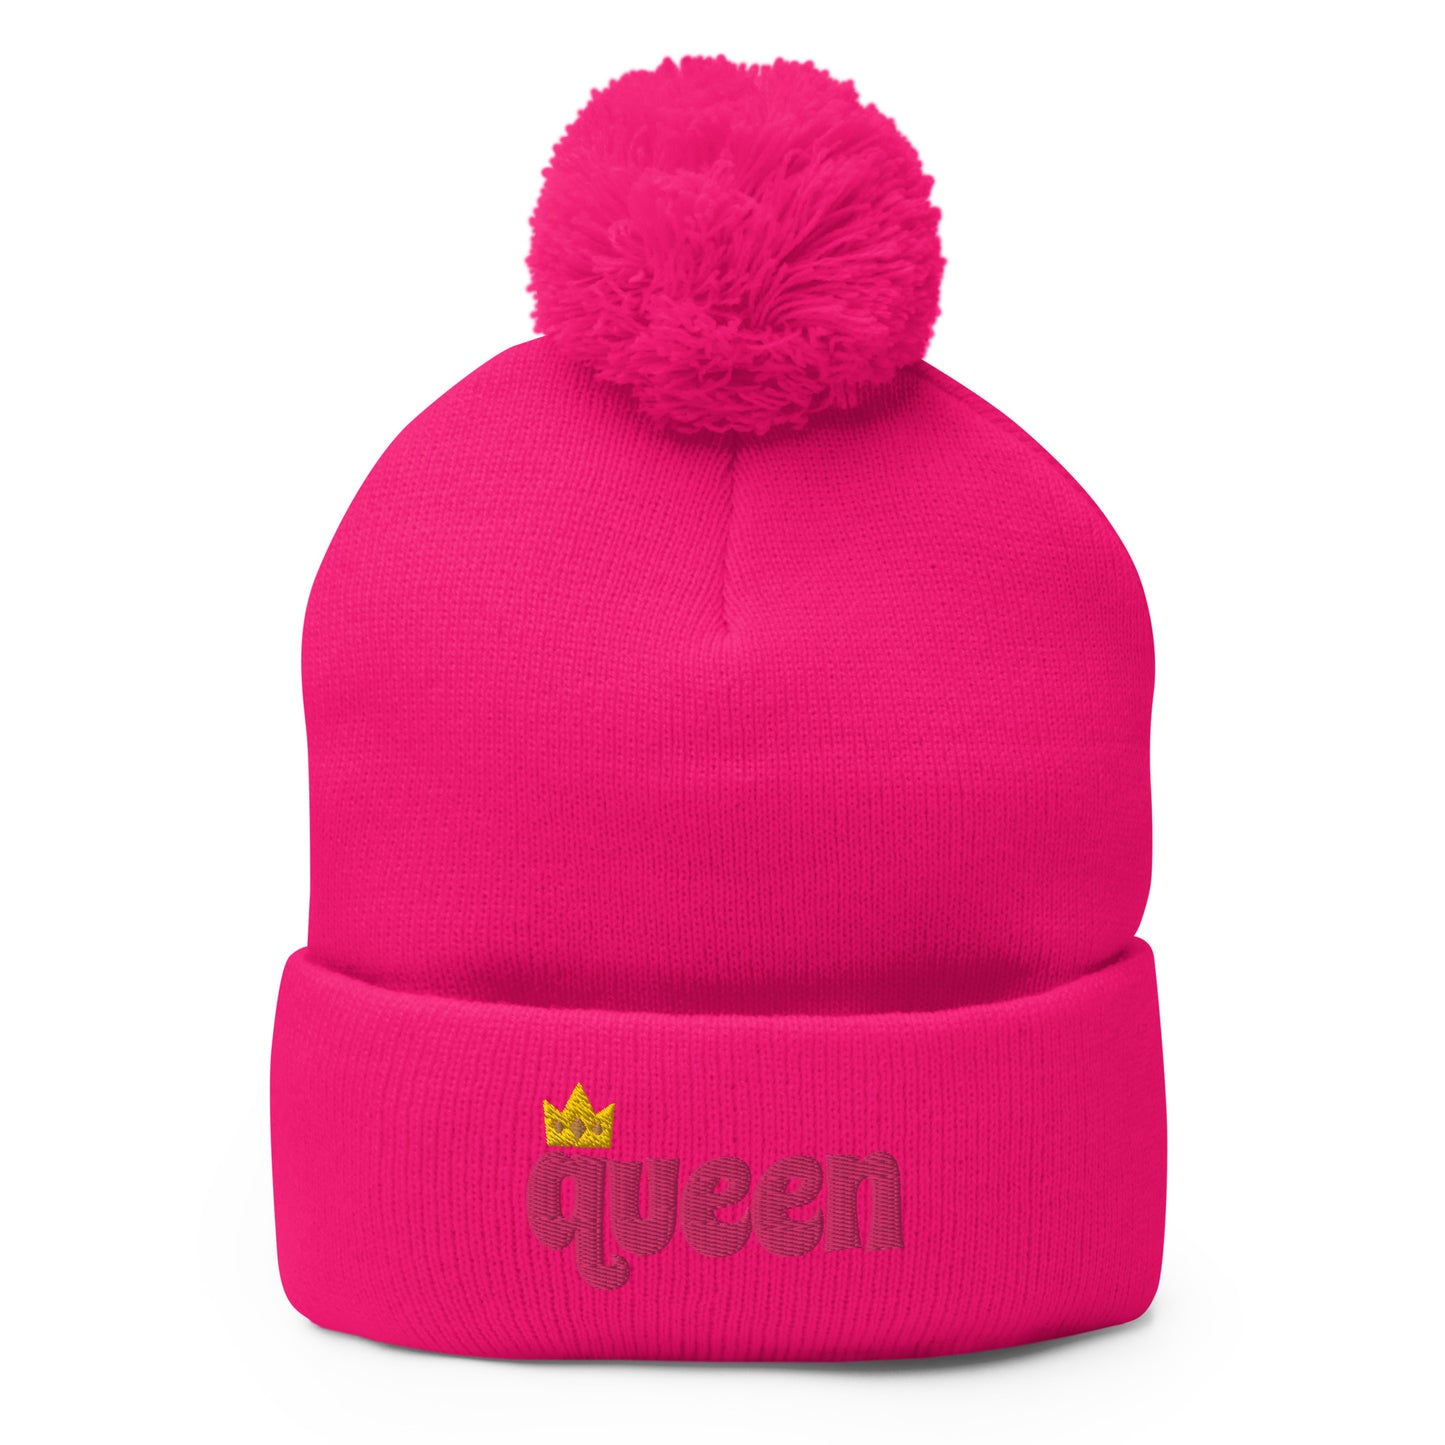 Embroidered Drag Queen Pom-Pom Beanie Hat